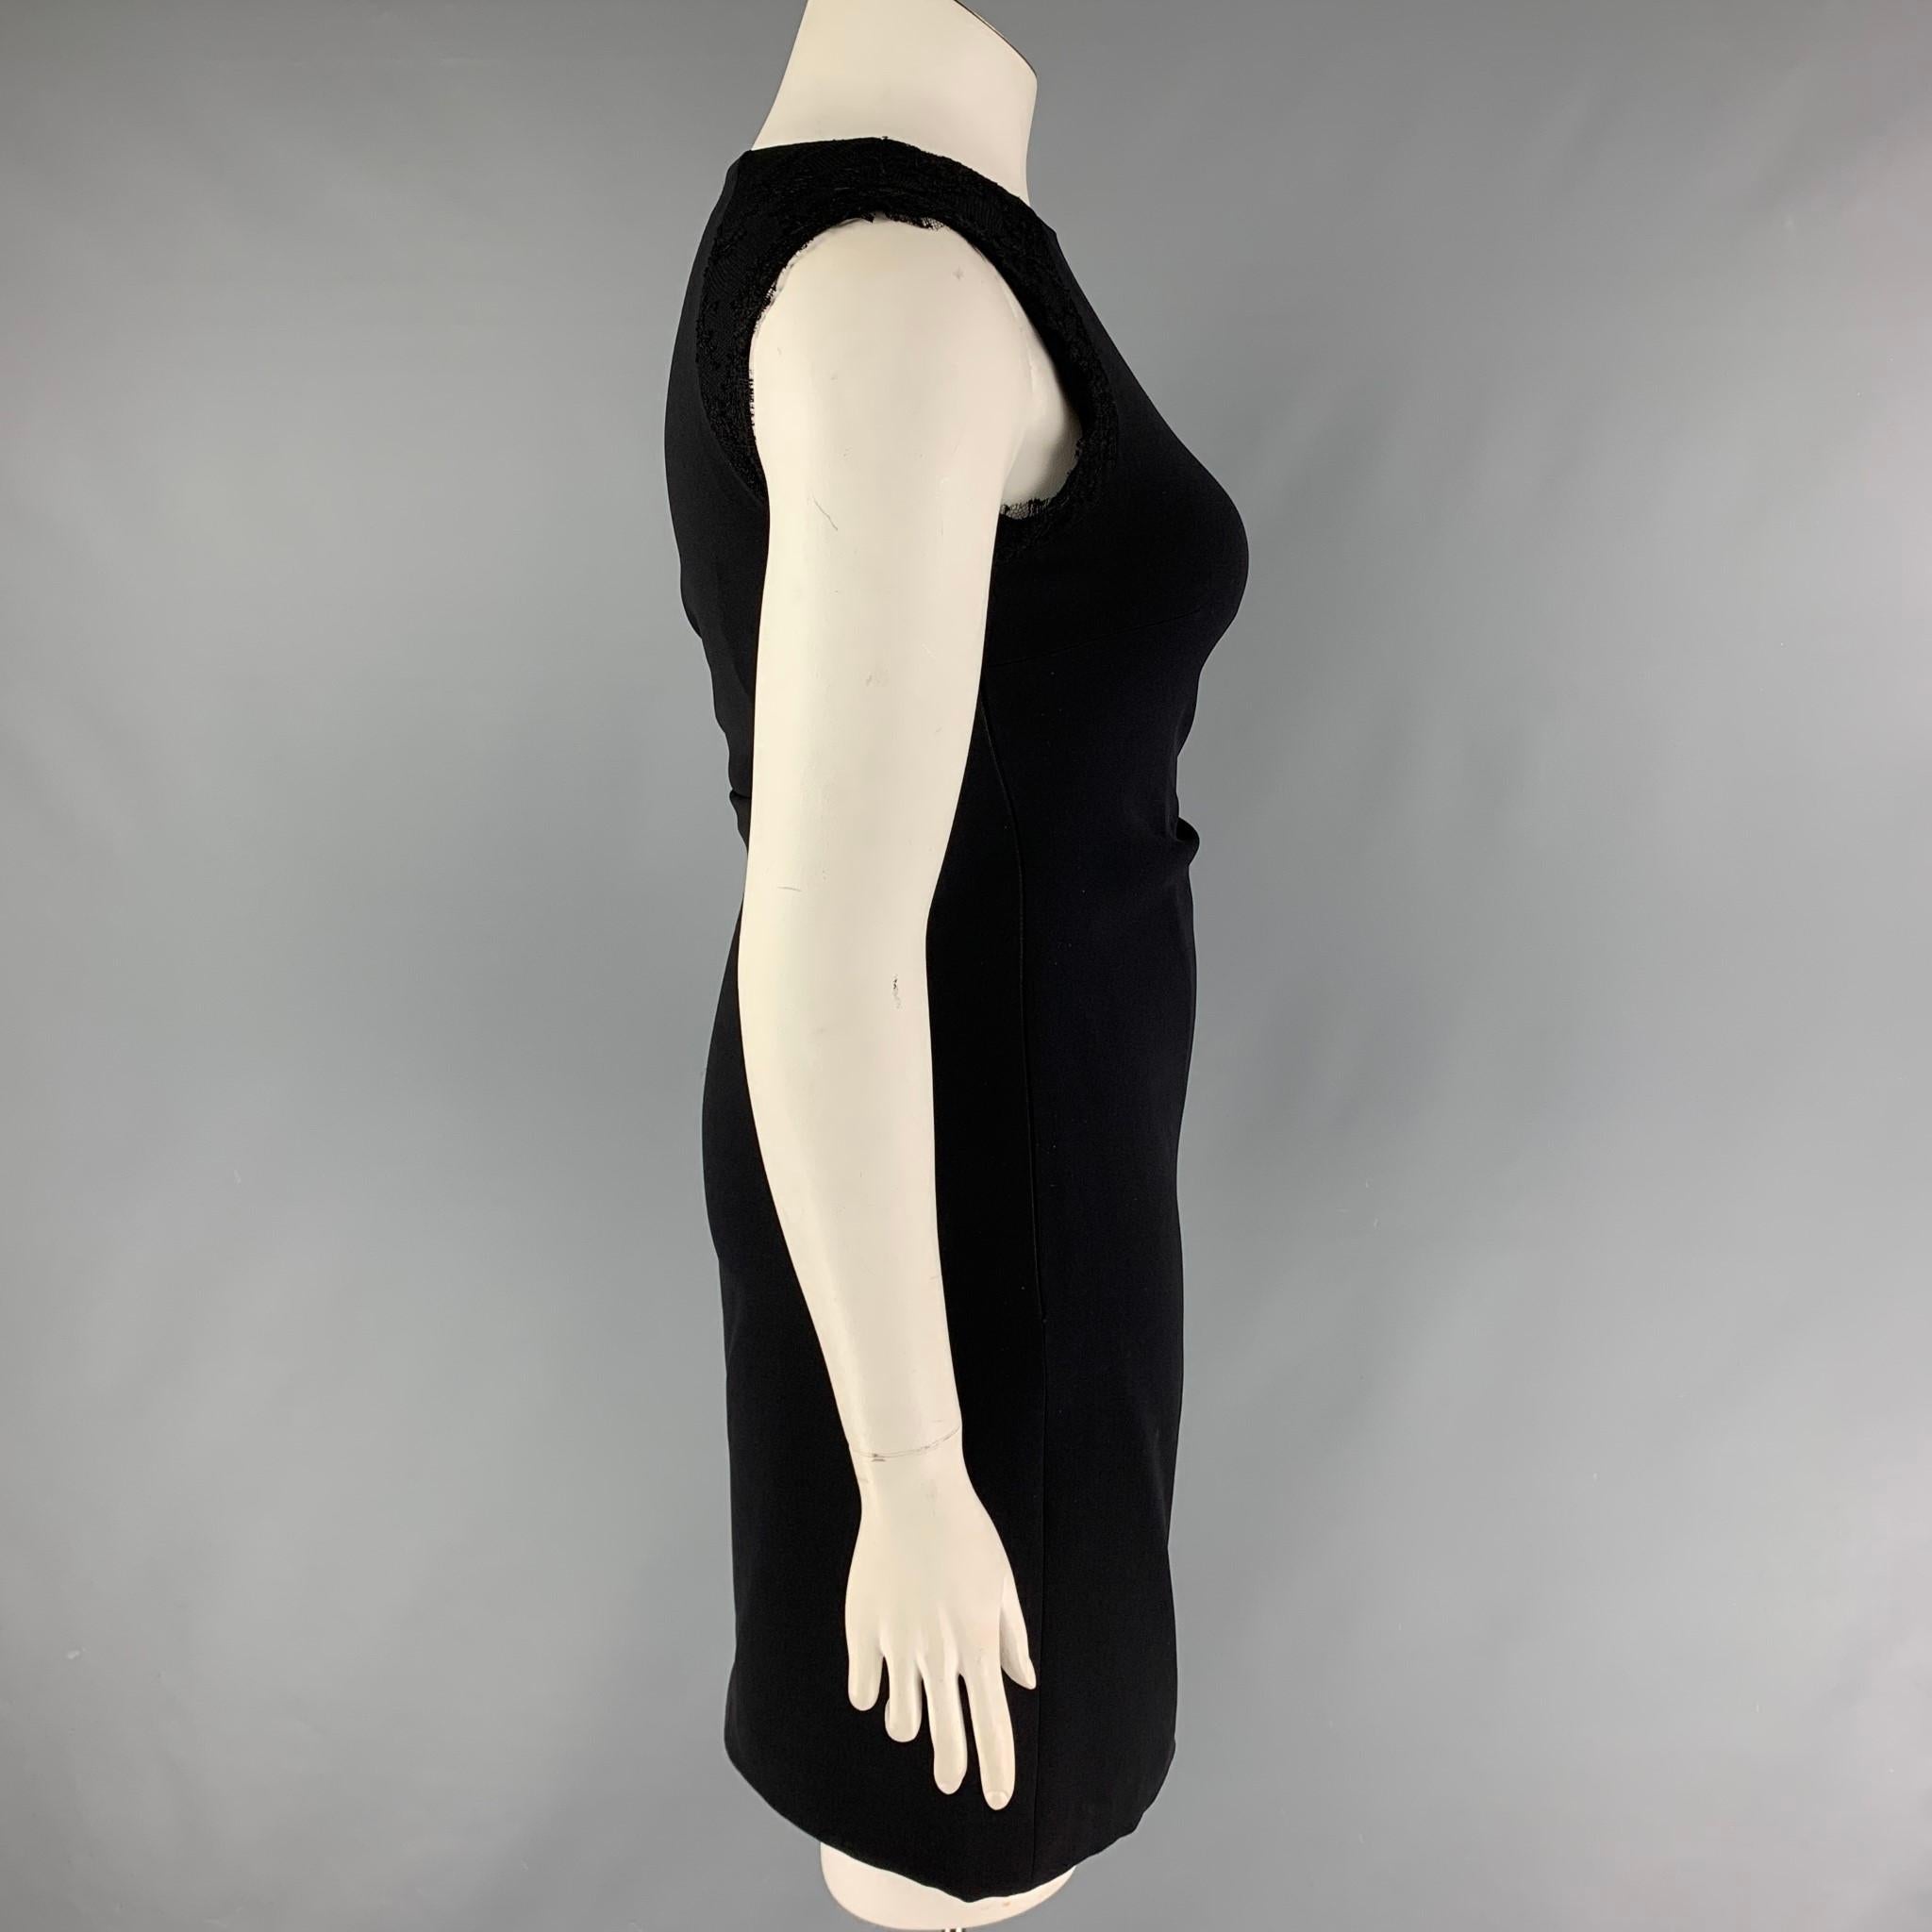 MONIQUE LHUILLIER dress comes in a black viscose / polyester with a silk lining featuring silk lace details, shift style, sleeveless, and a side zip up closure, 

Very Good Pre-Owned Condition.
Marked: 10

Measurements:

Shoulder: 14 in.
Bust: 34